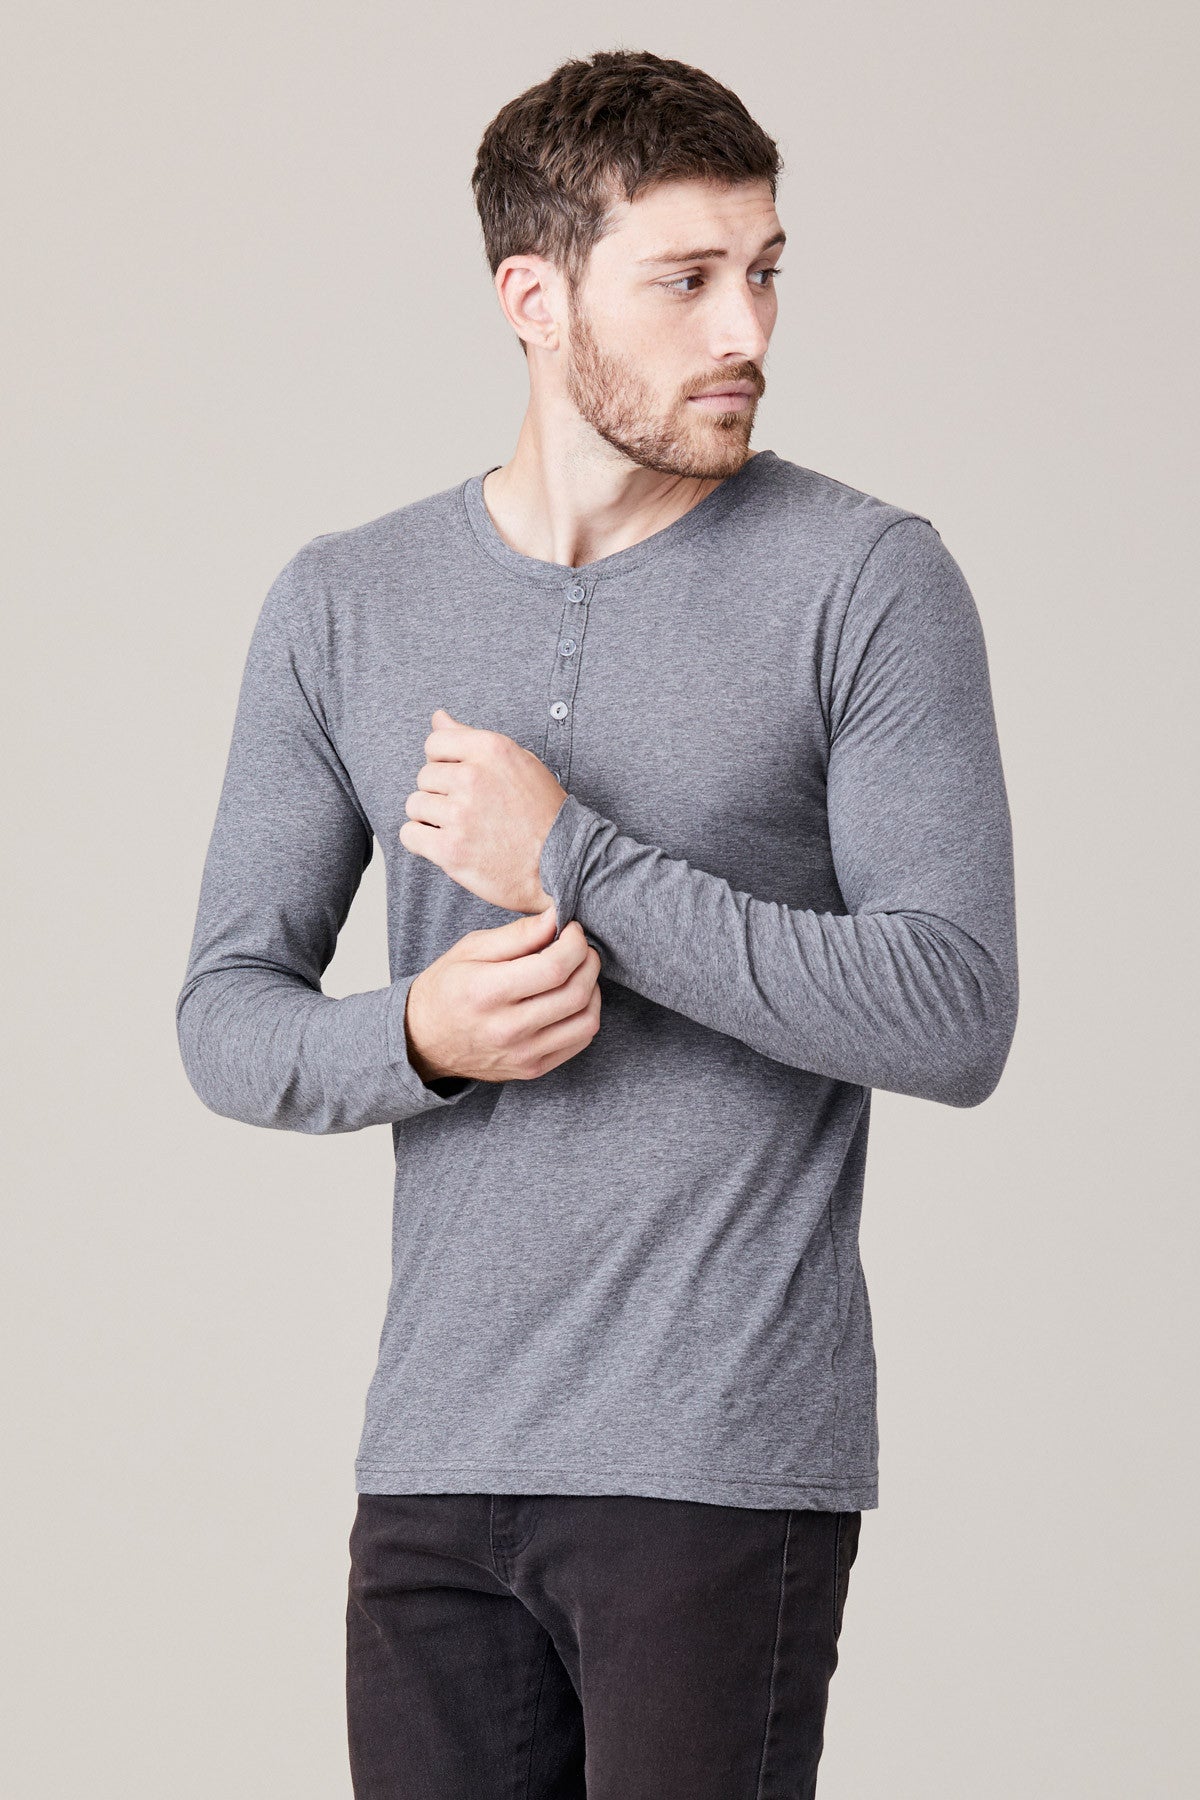 Men's Long Sleeve Button Henley - Heather Grey S by LNA Clothing